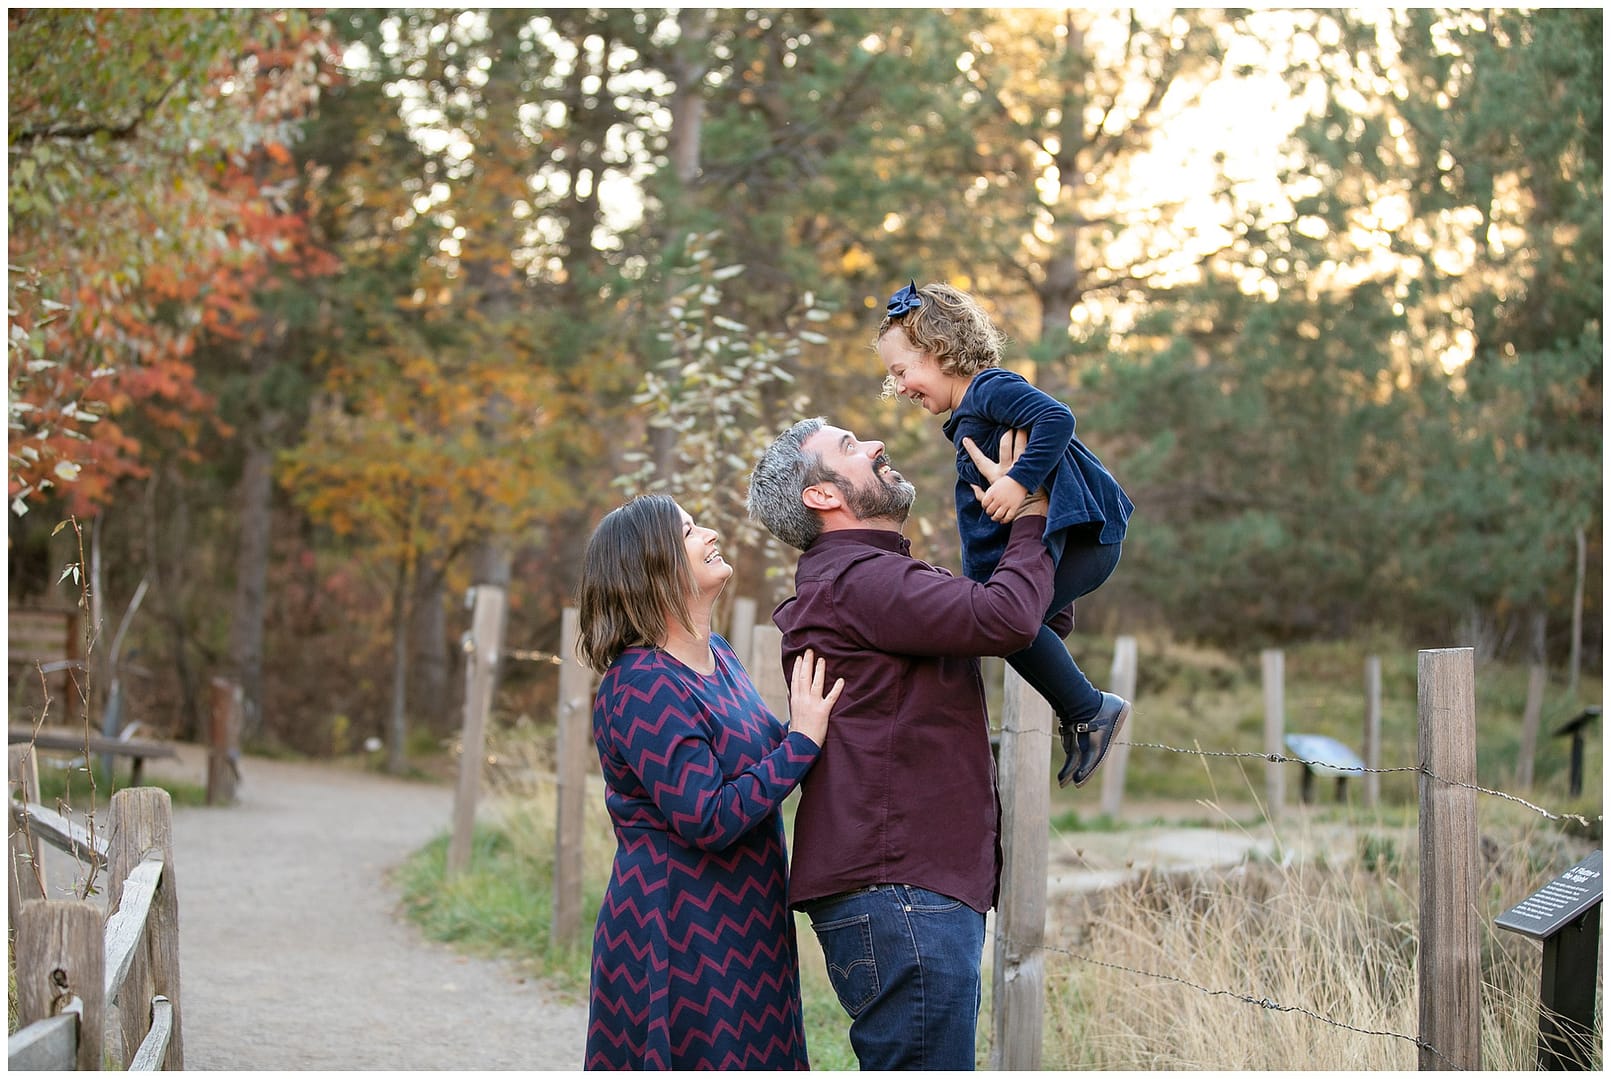 Little girl smiles during Boise family photos. Photo by Tiffany Hix Photography.